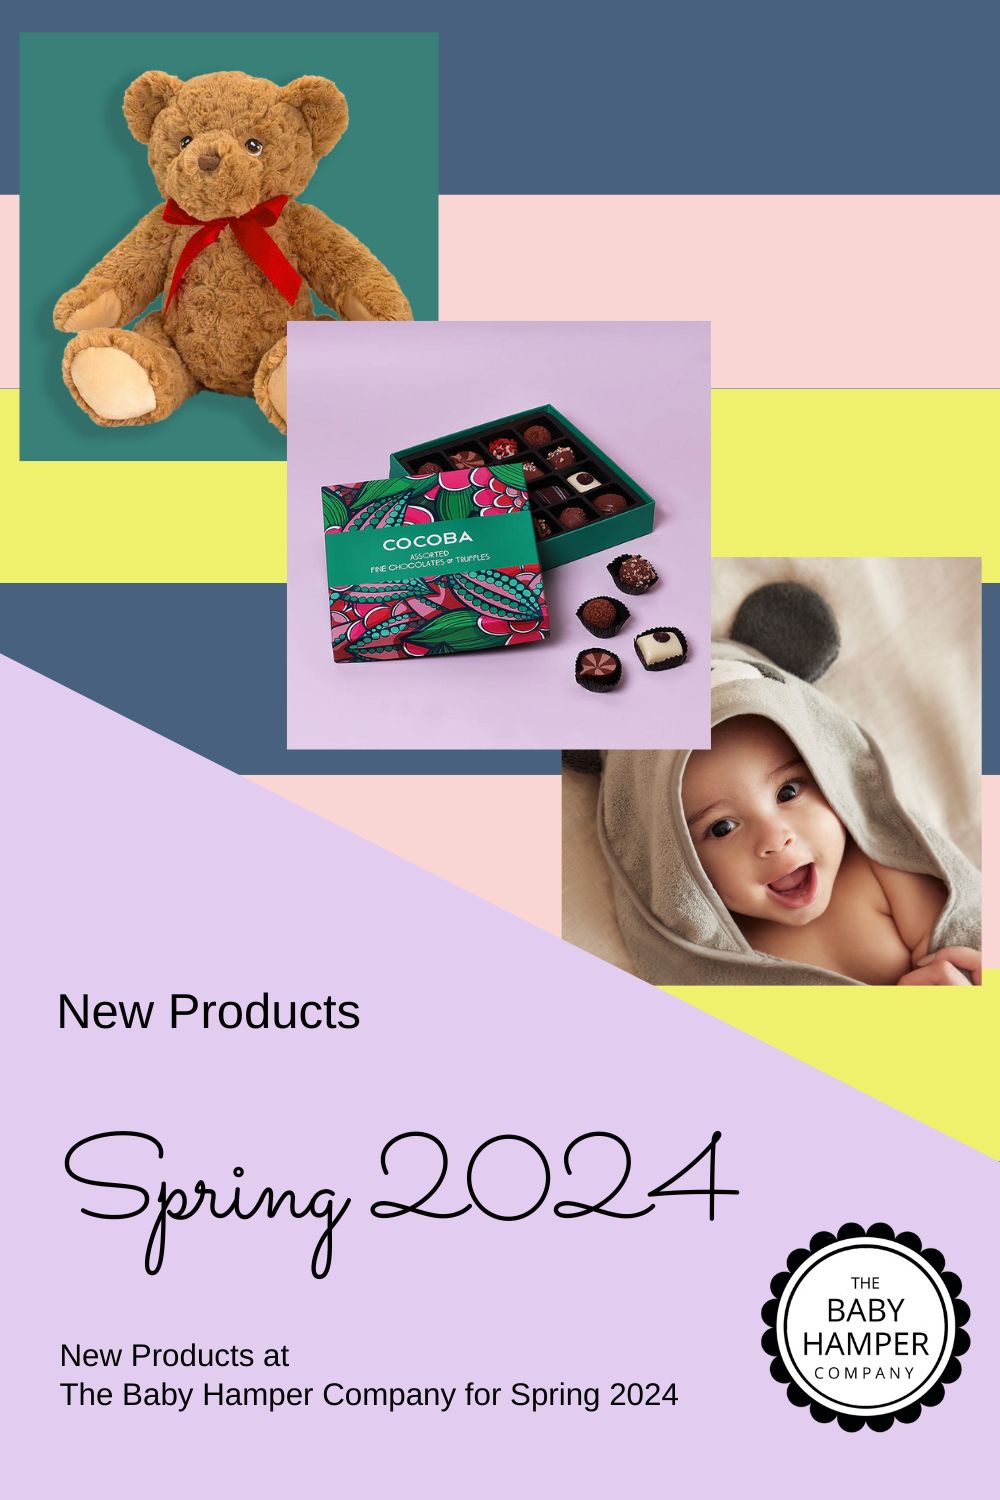 New Products at The Baby Hamper Company for Spring 2024